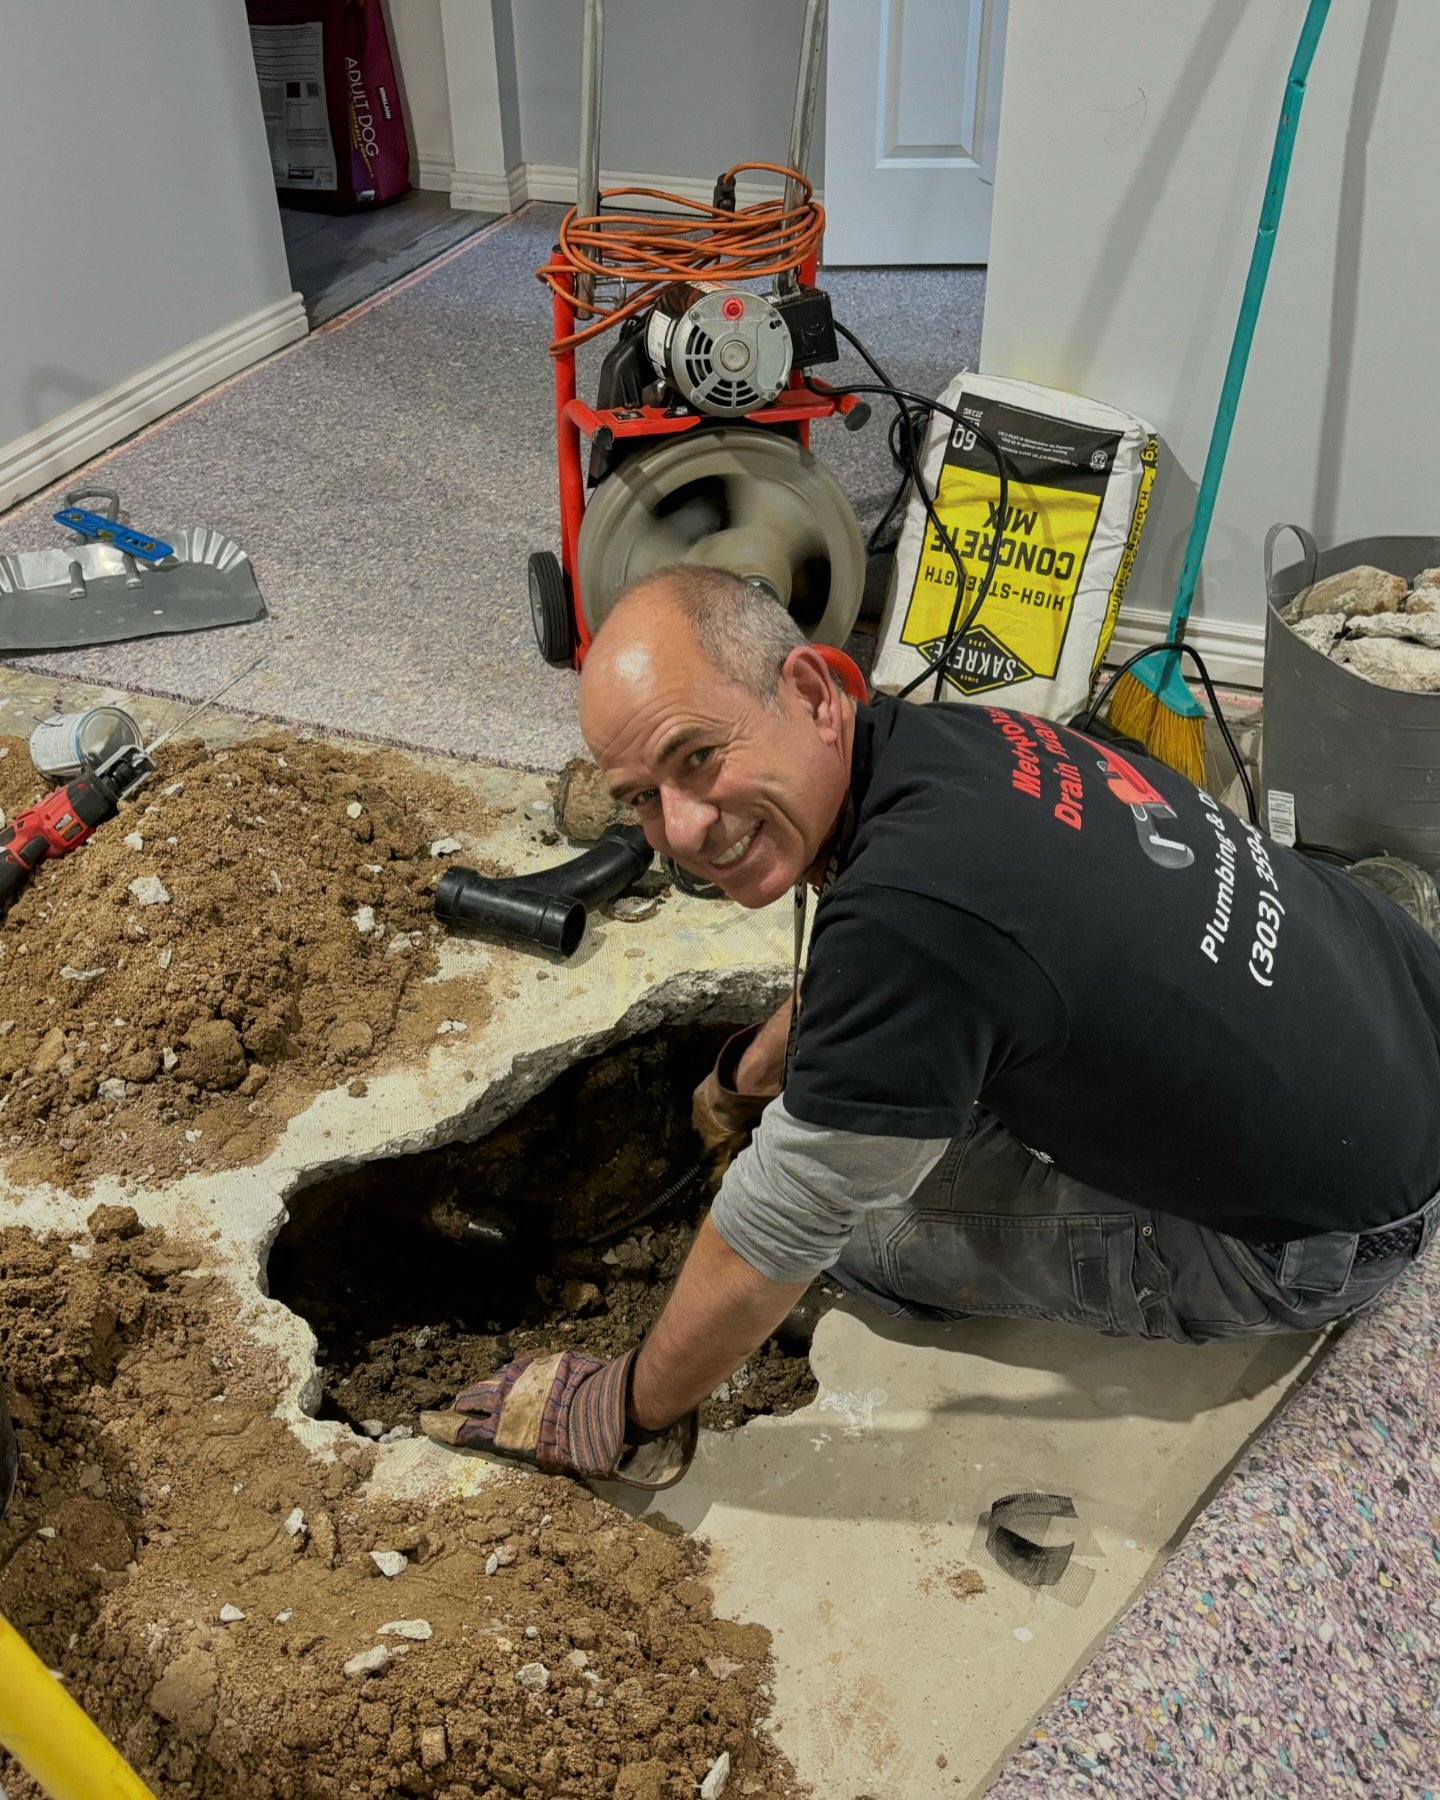 We&rsquo;ll go to any lengths to fix your plumbing problems! John doesn&rsquo;t mind the occasional underground adventure to keep your pipes flowing.

Call Today 303-359-8565

#call 
#plumbersofinstagram 
#drains 
#homeimprovement